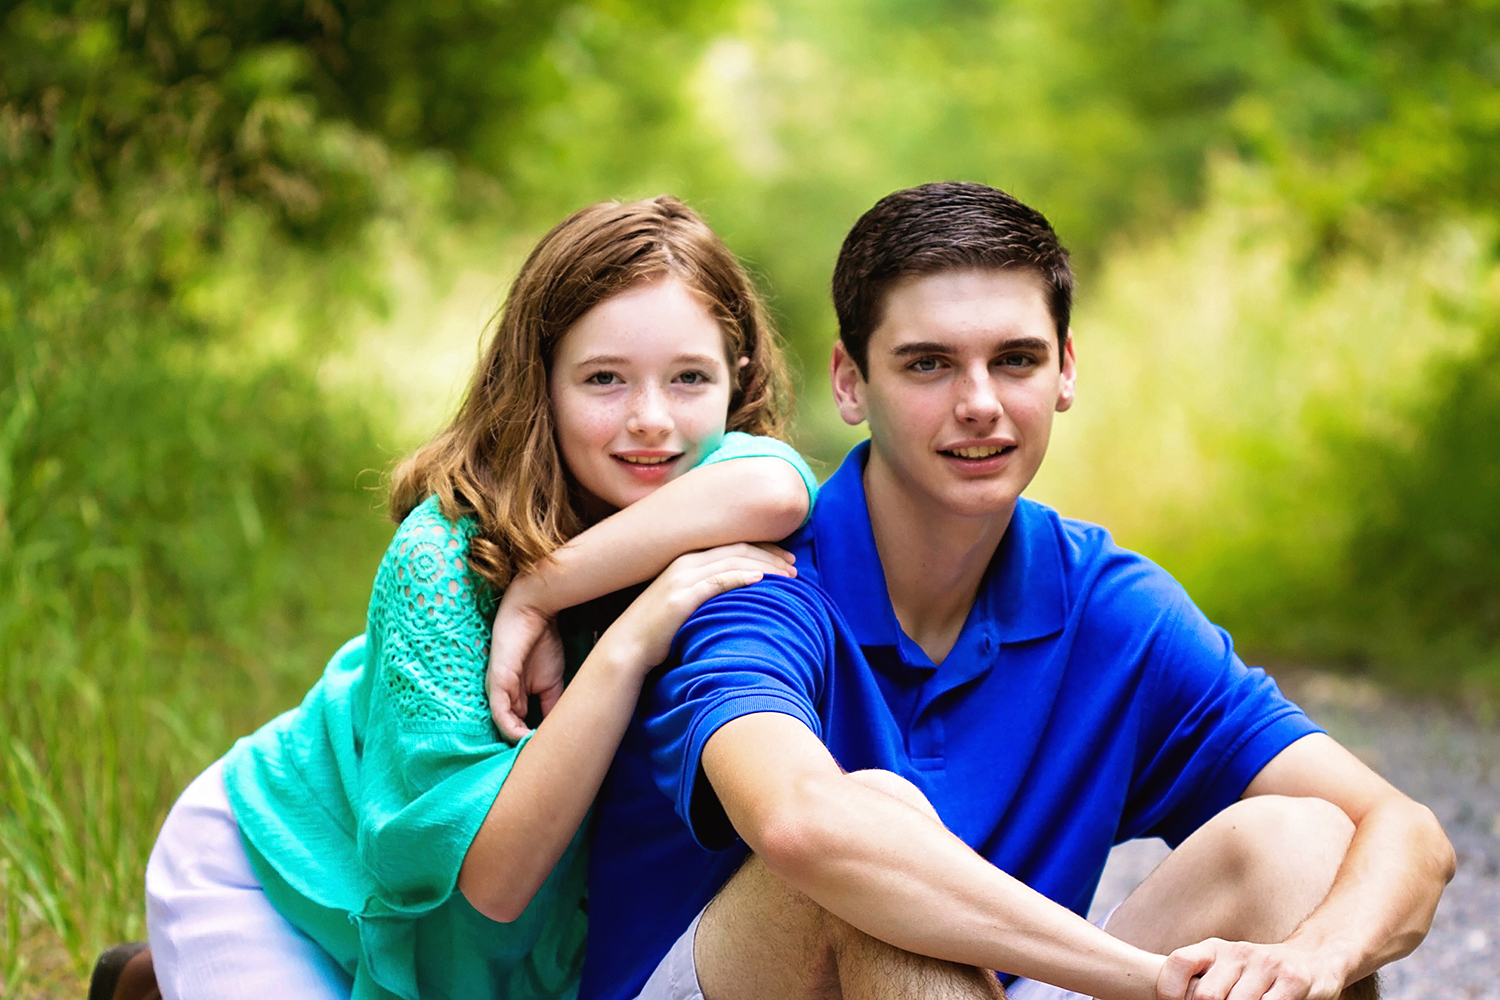 sibling in green and blue on forest path.jpg